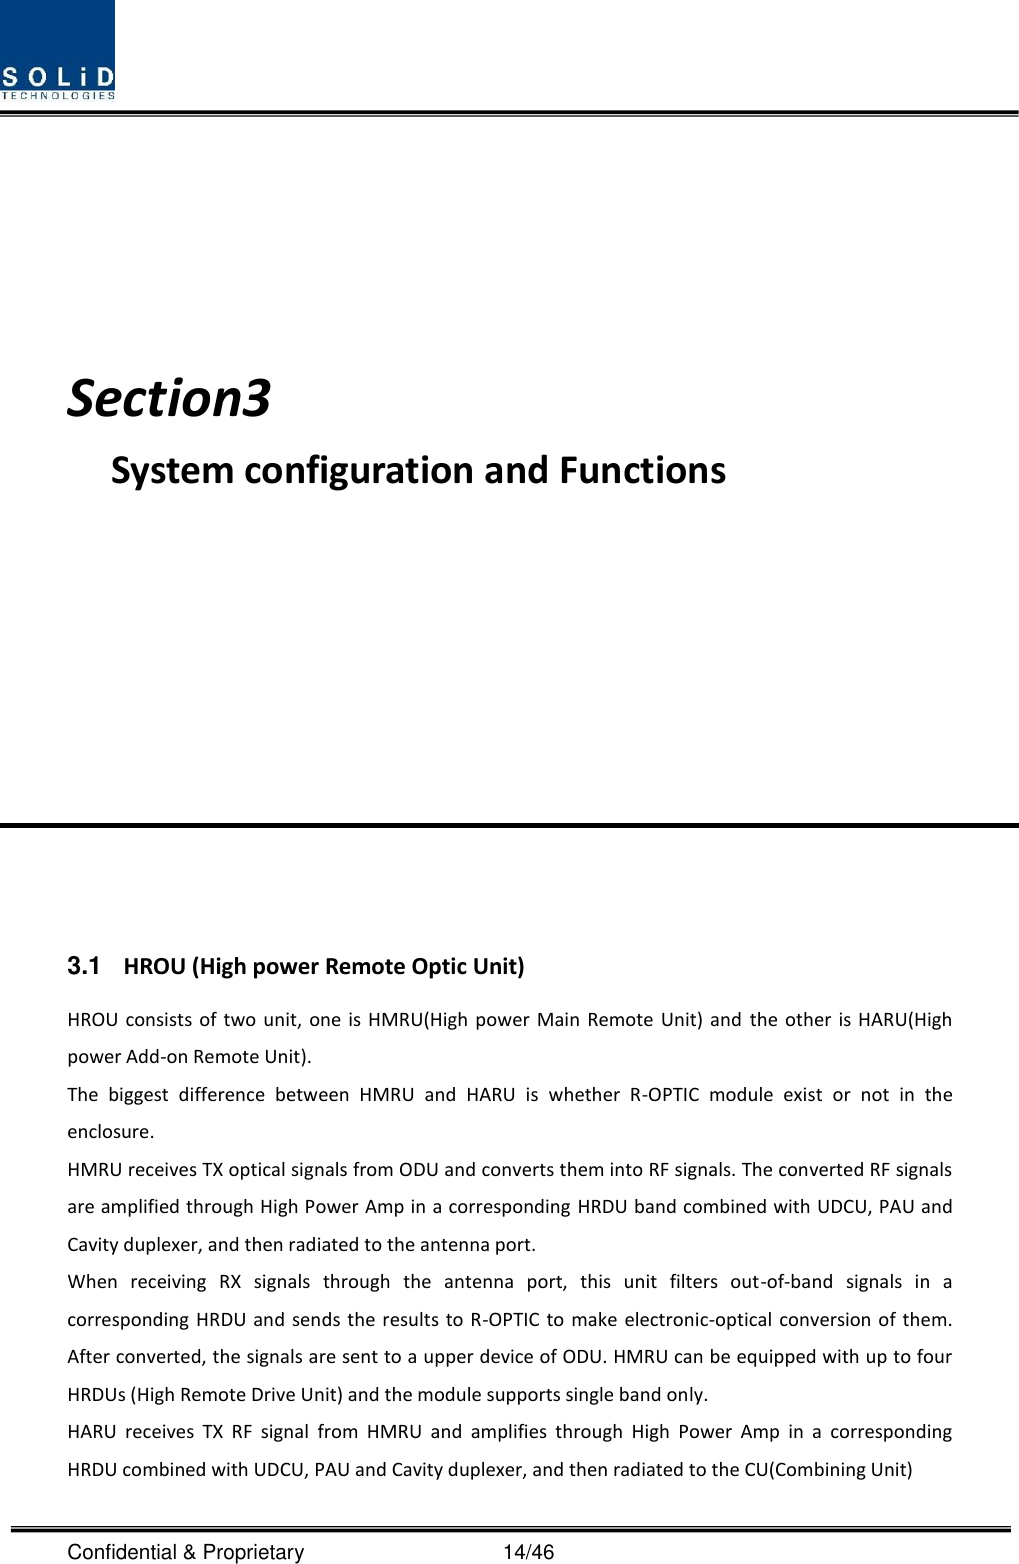  Confidential &amp; Proprietary                                      14/46    Section3                           System configuration and Functions            3.1  HROU (High power Remote Optic Unit) HROU consists  of two unit,  one is HMRU(High  power Main Remote  Unit)  and  the other is  HARU(High power Add-on Remote Unit). The  biggest  difference  between  HMRU  and  HARU  is  whether  R-OPTIC  module  exist  or  not  in  the enclosure. HMRU receives TX optical signals from ODU and converts them into RF signals. The converted RF signals are amplified through High Power Amp in a corresponding HRDU band combined with UDCU, PAU and Cavity duplexer, and then radiated to the antenna port. When  receiving  RX  signals  through  the  antenna  port,  this  unit  filters  out-of-band  signals  in  a corresponding HRDU  and sends  the results to R-OPTIC to  make electronic-optical  conversion of them. After converted, the signals are sent to a upper device of ODU. HMRU can be equipped with up to four HRDUs (High Remote Drive Unit) and the module supports single band only. HARU  receives  TX  RF  signal  from  HMRU  and  amplifies  through  High  Power  Amp  in  a  corresponding HRDU combined with UDCU, PAU and Cavity duplexer, and then radiated to the CU(Combining Unit) 